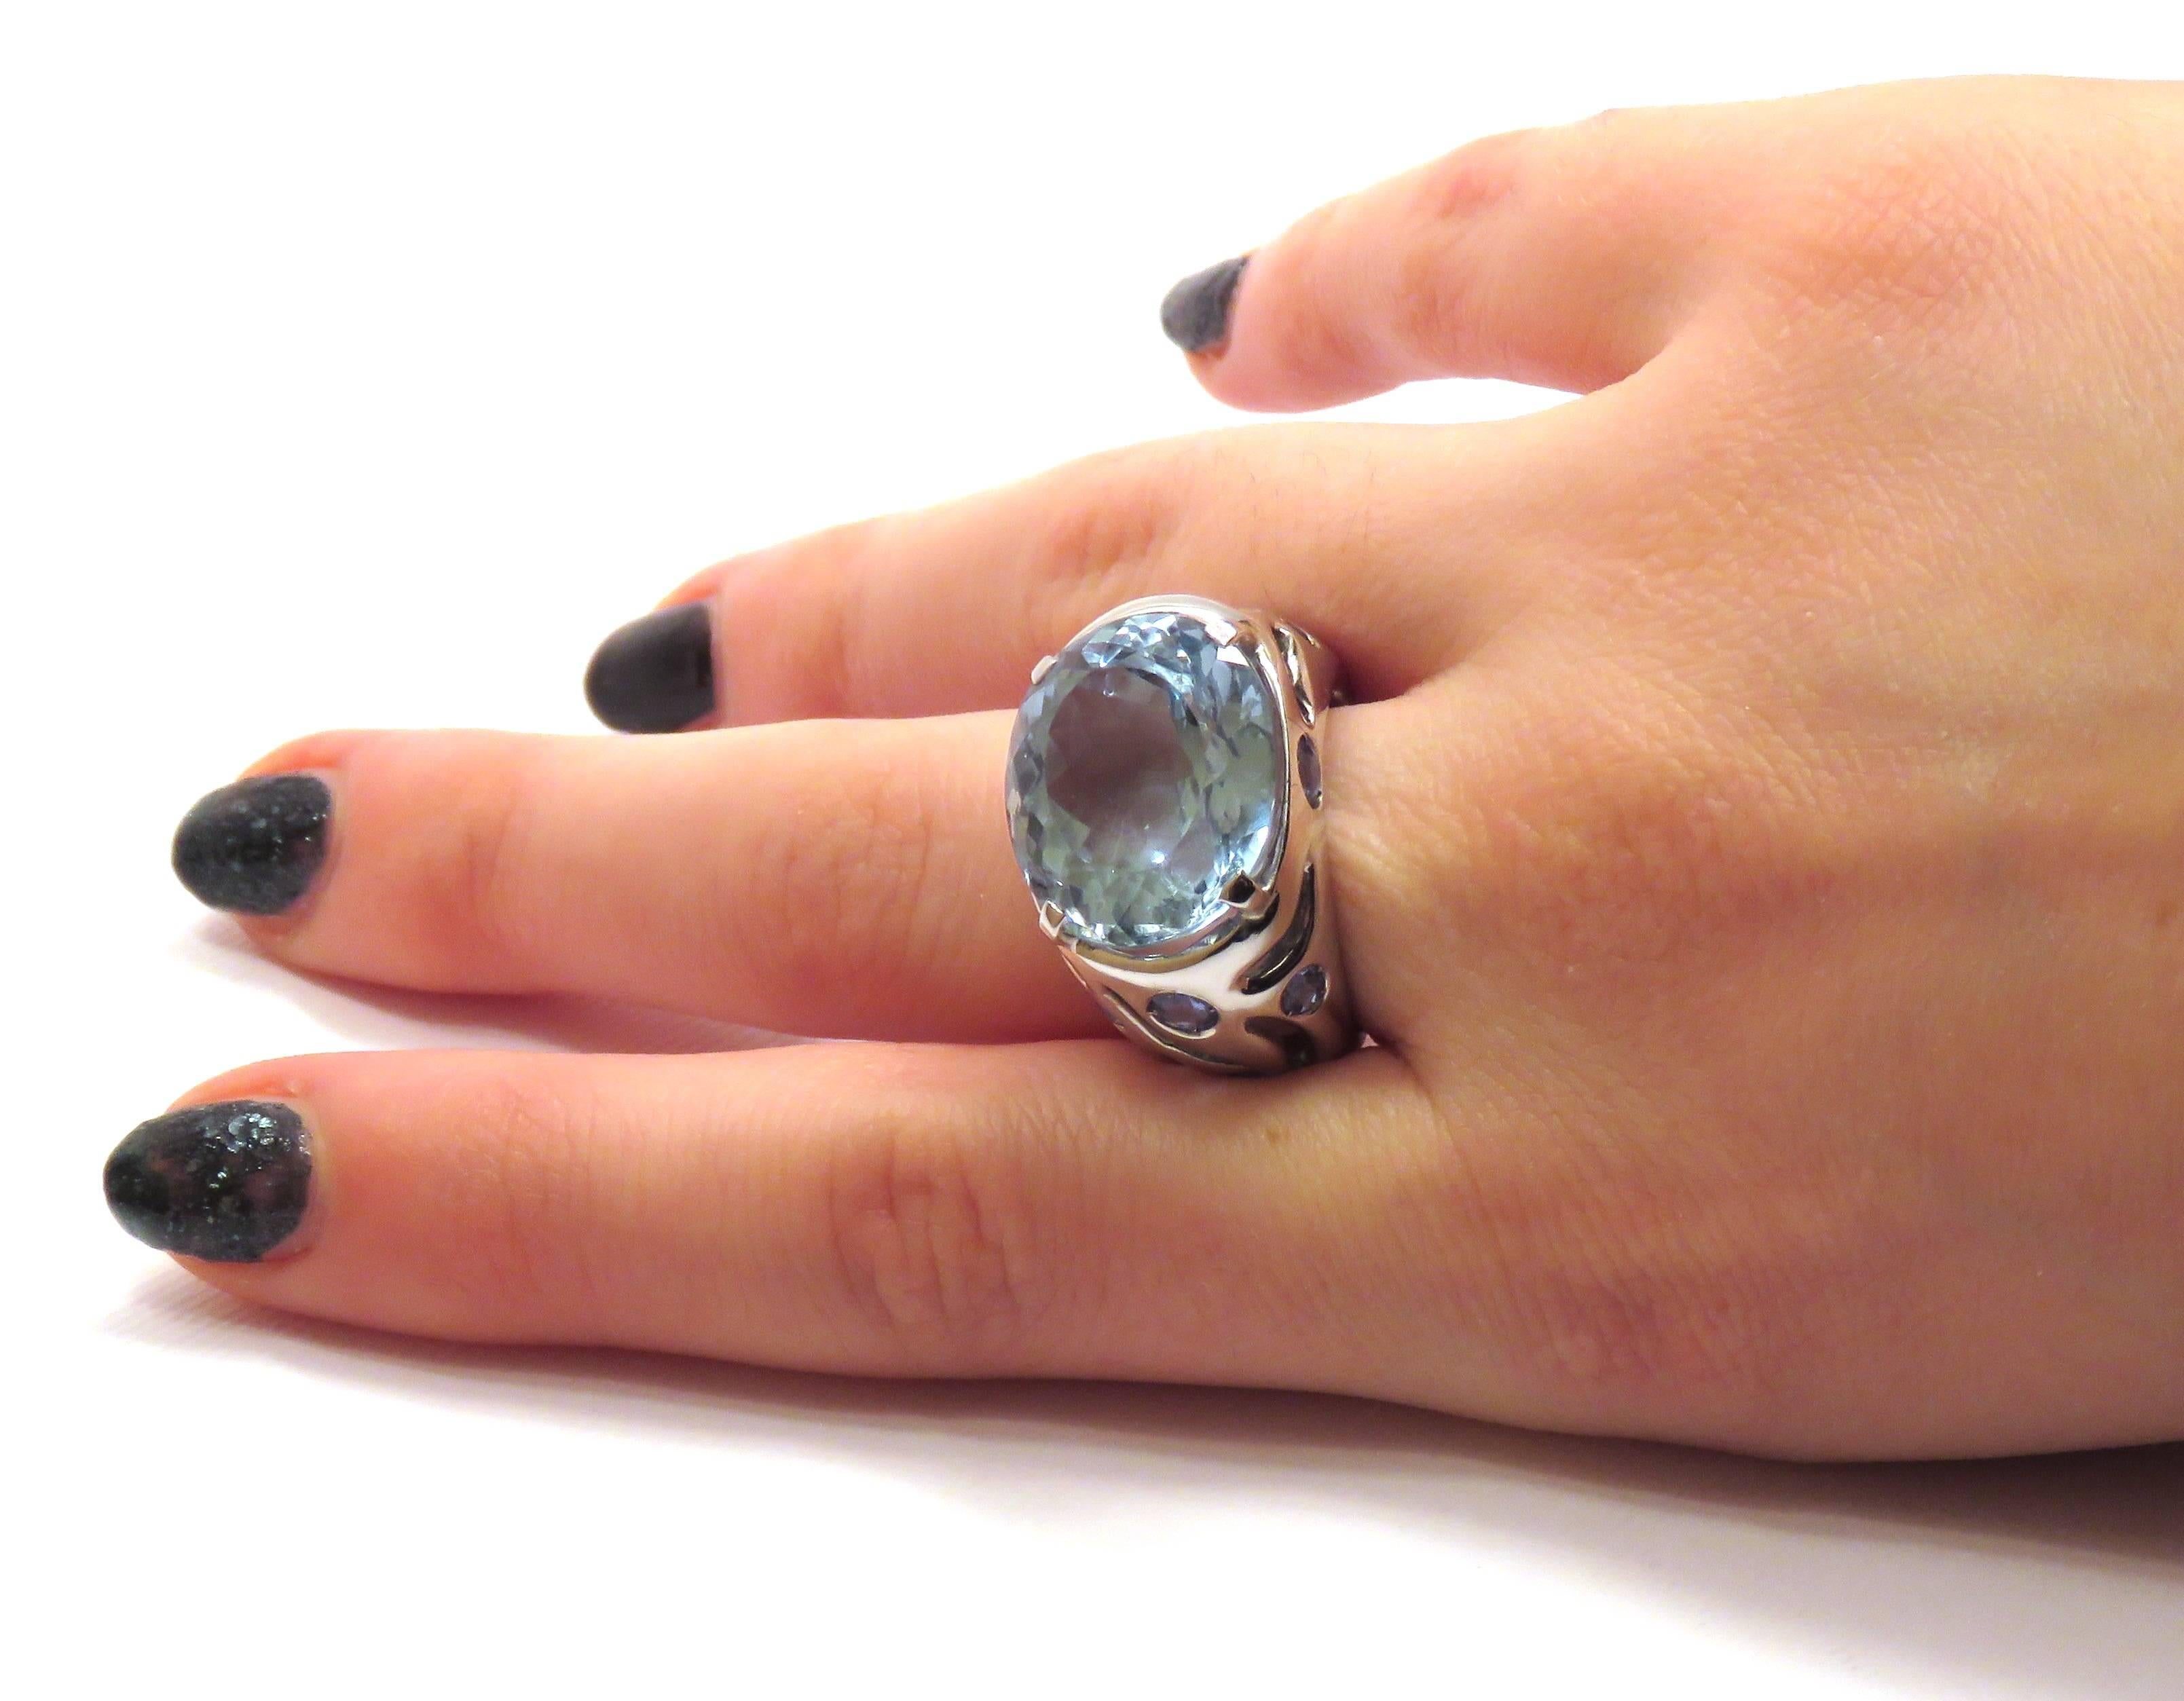 Stunning cocktail band ring handmade in 18k white gold featuring a large natural faceted blue topaz ctw 23.49. The band is decorated with carved waves and 10 blue sapphires ctw 3.40 totally.   
Us finger size 6 3/4, resizable. Marked with the